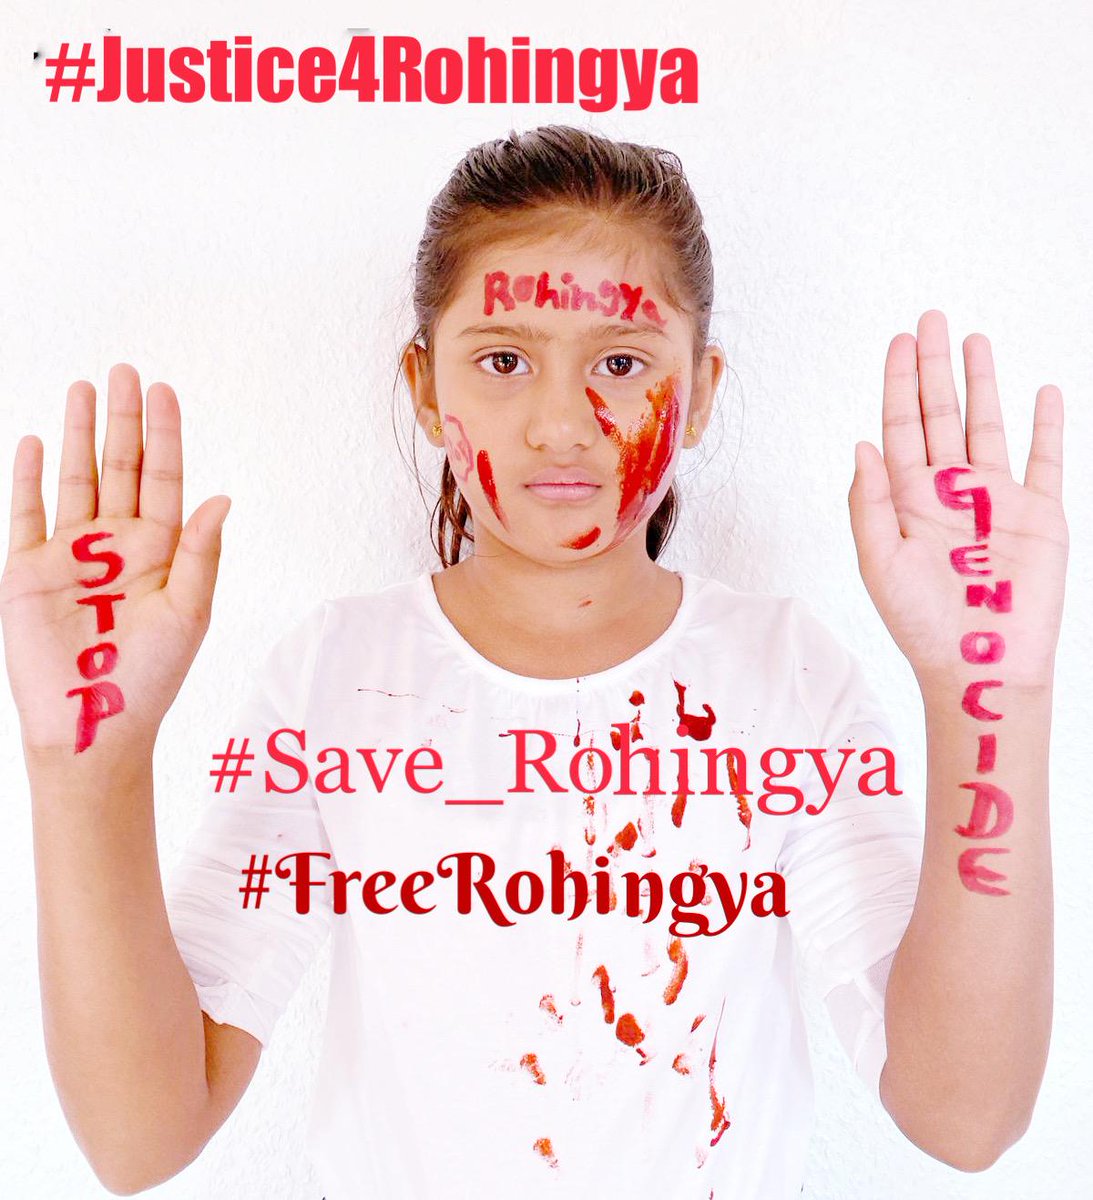 Rohingya women are reminding the international community to take much more substantive and swift actions to hold Myanmar military and institutions to account. We have suffered through enough.  #Rohingyawomen  #CallItGenocide  #RememberRohingya  #RohingyaGenocideRemembranceDay